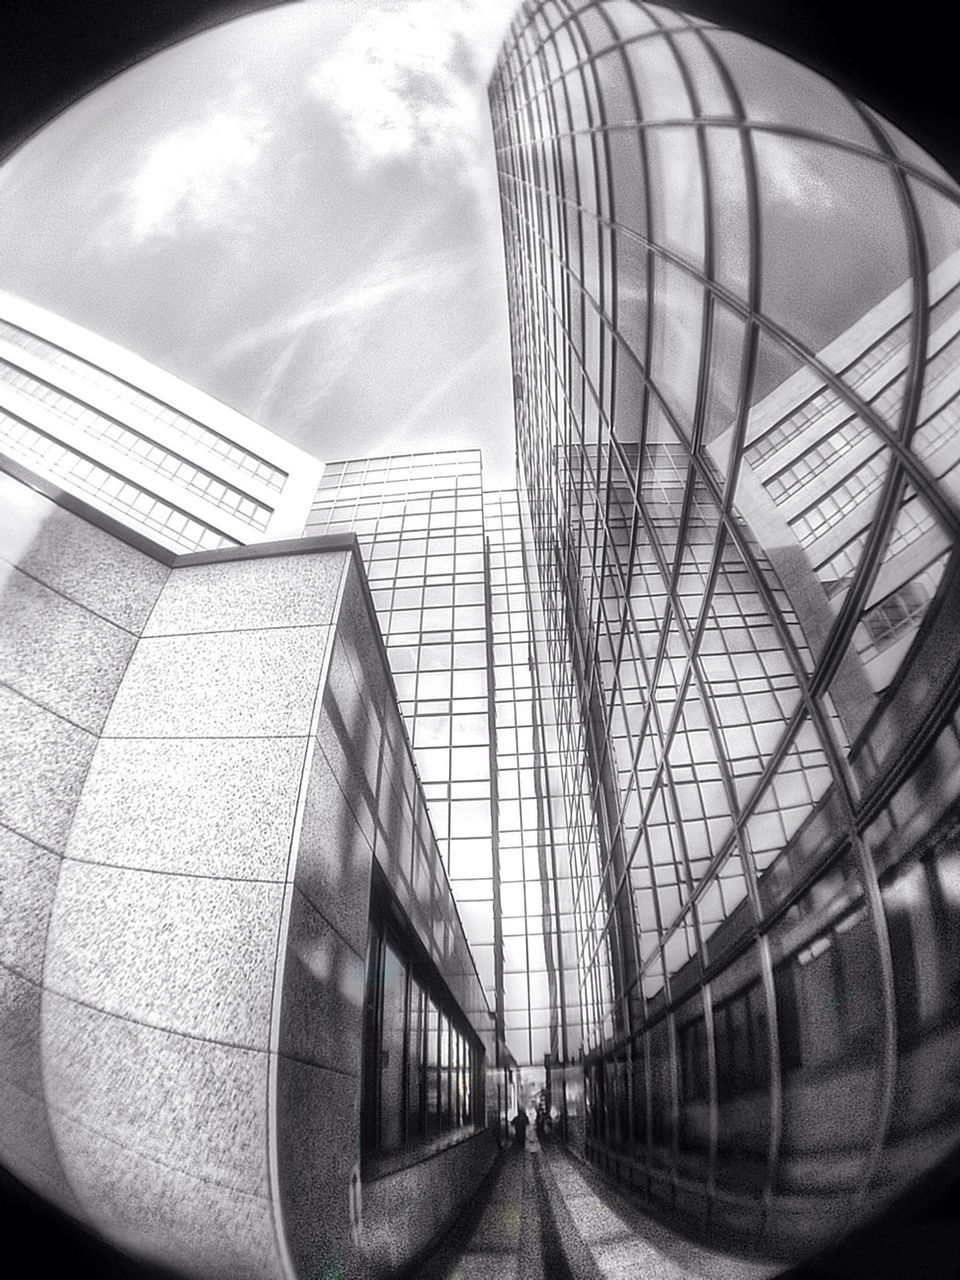 architecture, built structure, building exterior, modern, the way forward, diminishing perspective, transportation, sky, low angle view, glass - material, building, city, indoors, vanishing point, day, no people, pattern, reflection, office building